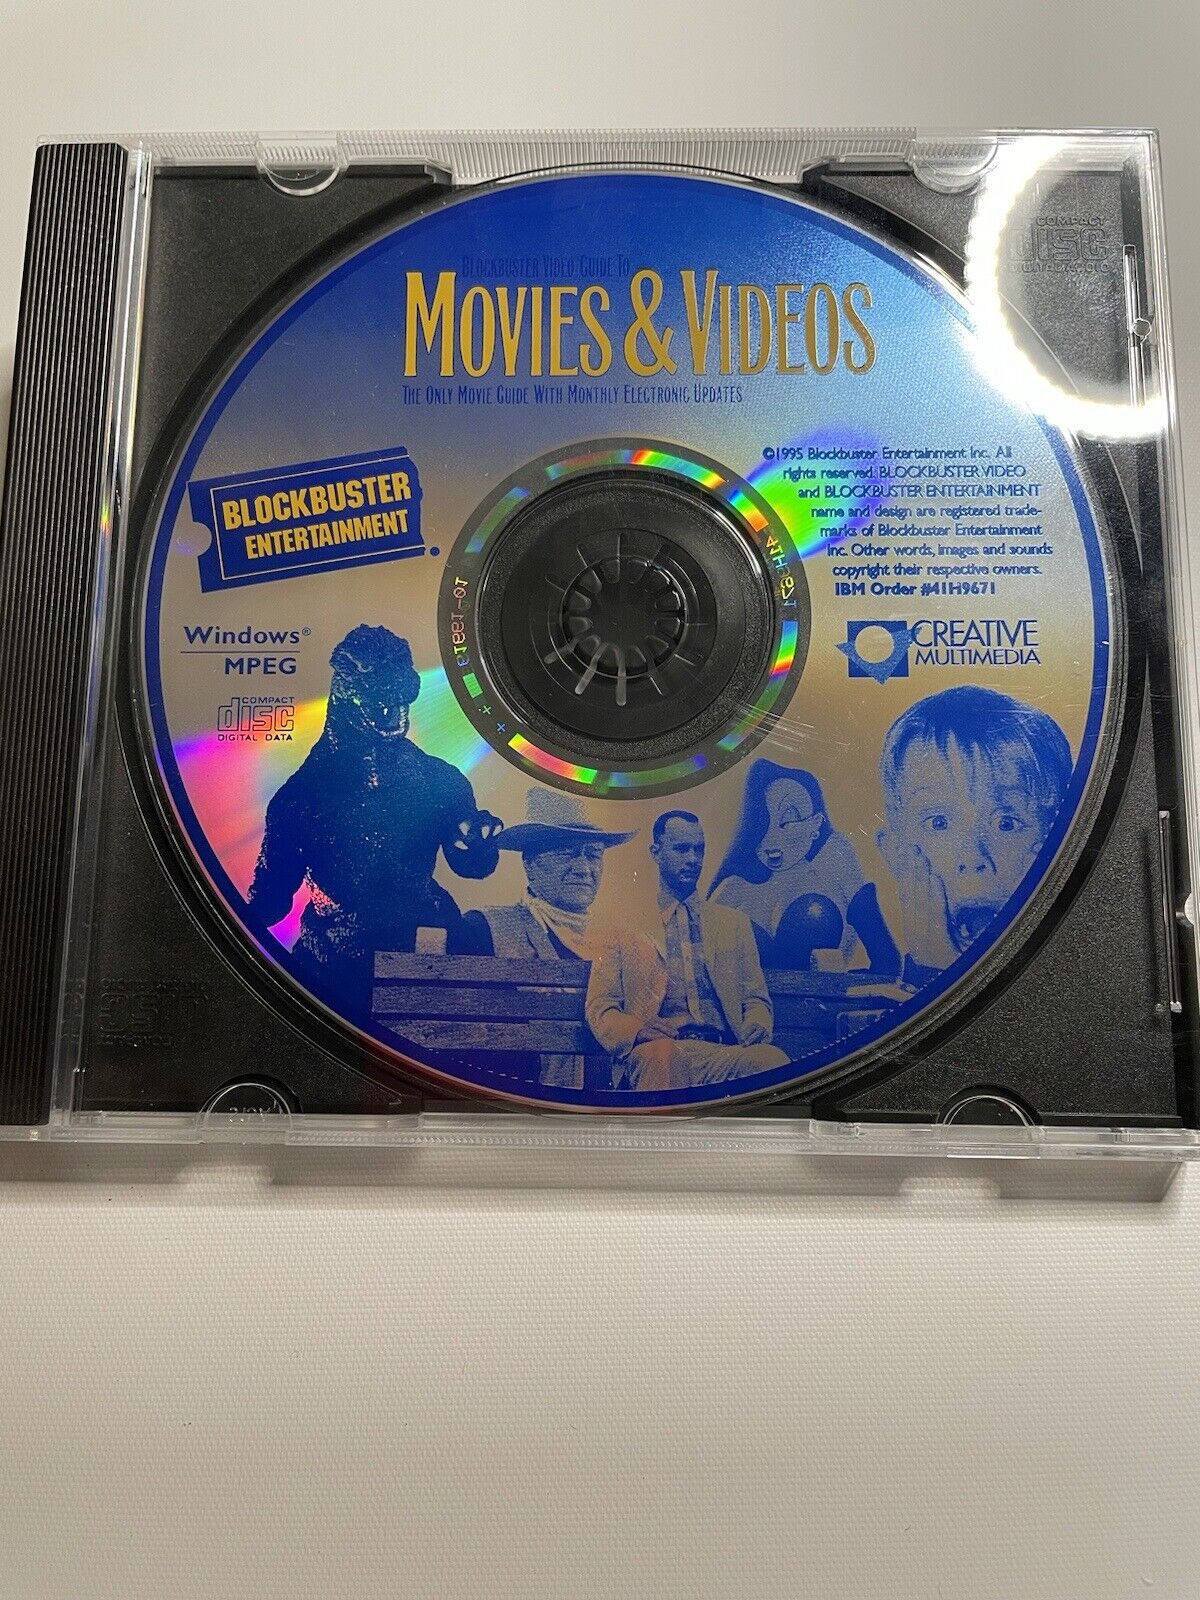 Blockbuster Video Guide to Movies & Videos (PC, 1995)